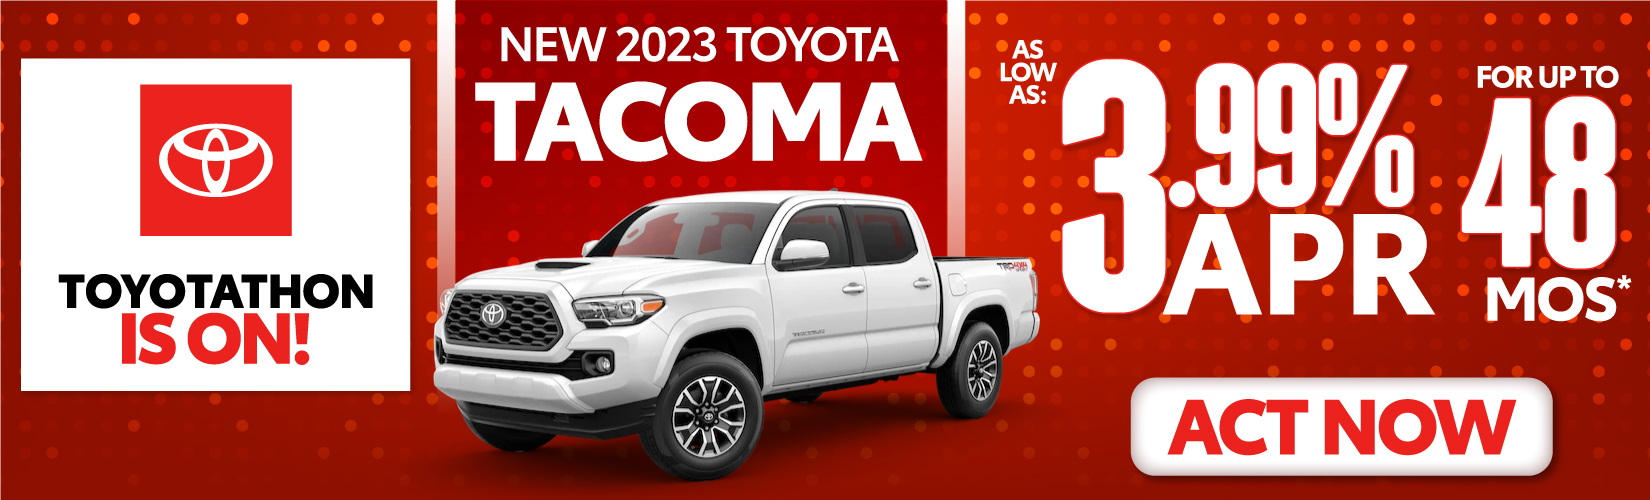 3.49% APR FOR UP TO 48 MOS.* On 22 TOYOTA MODELS- ACT NOW